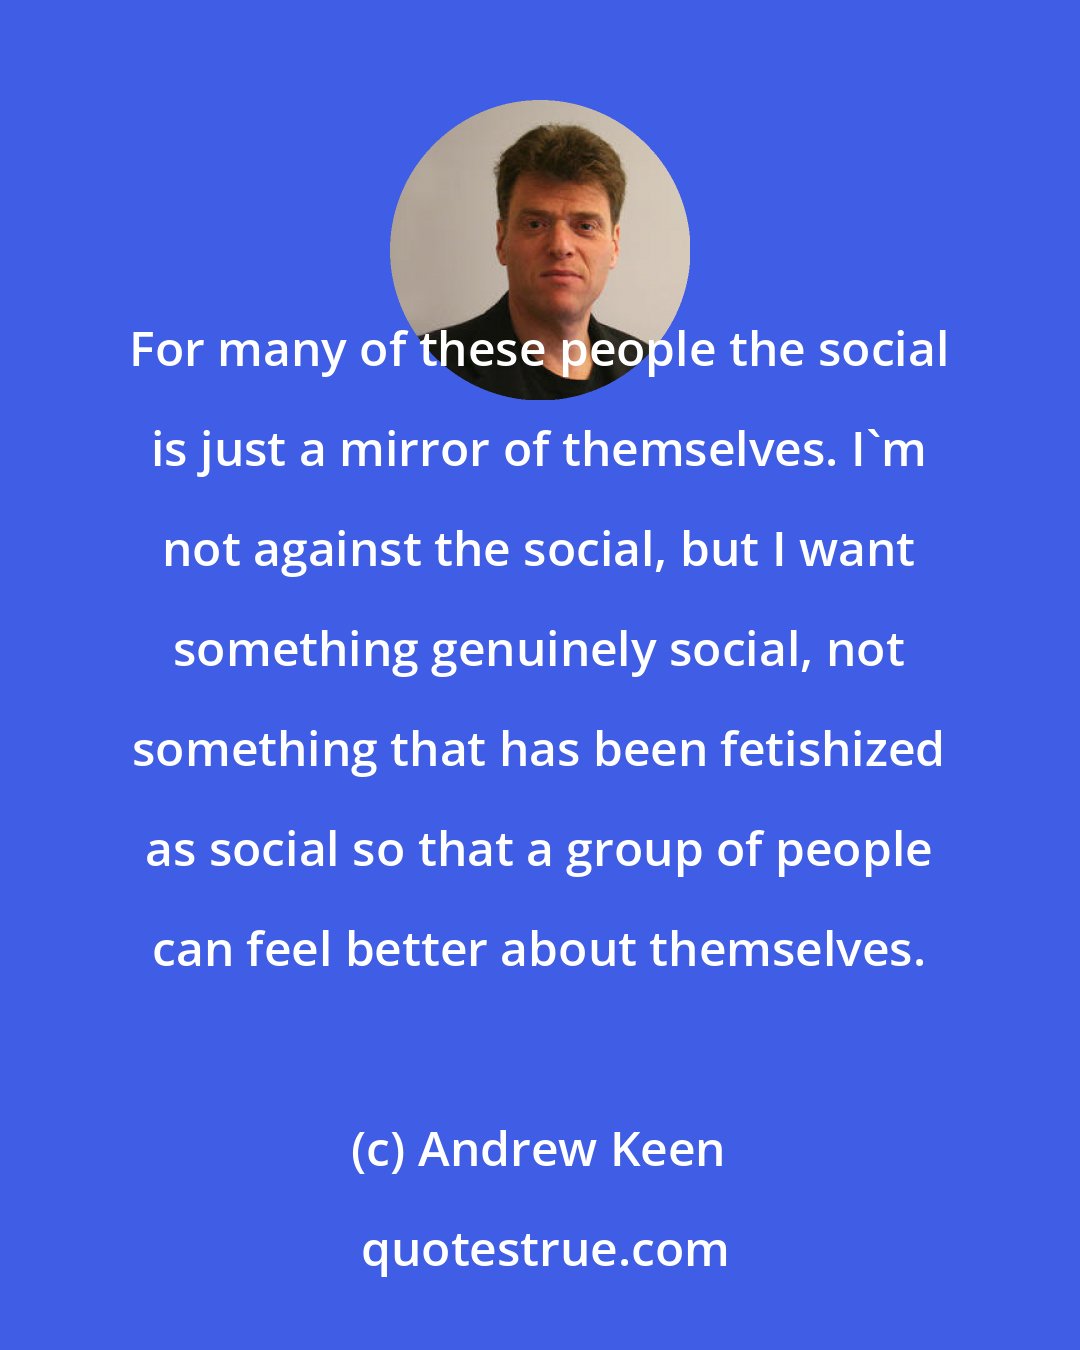 Andrew Keen: For many of these people the social is just a mirror of themselves. I'm not against the social, but I want something genuinely social, not something that has been fetishized as social so that a group of people can feel better about themselves.